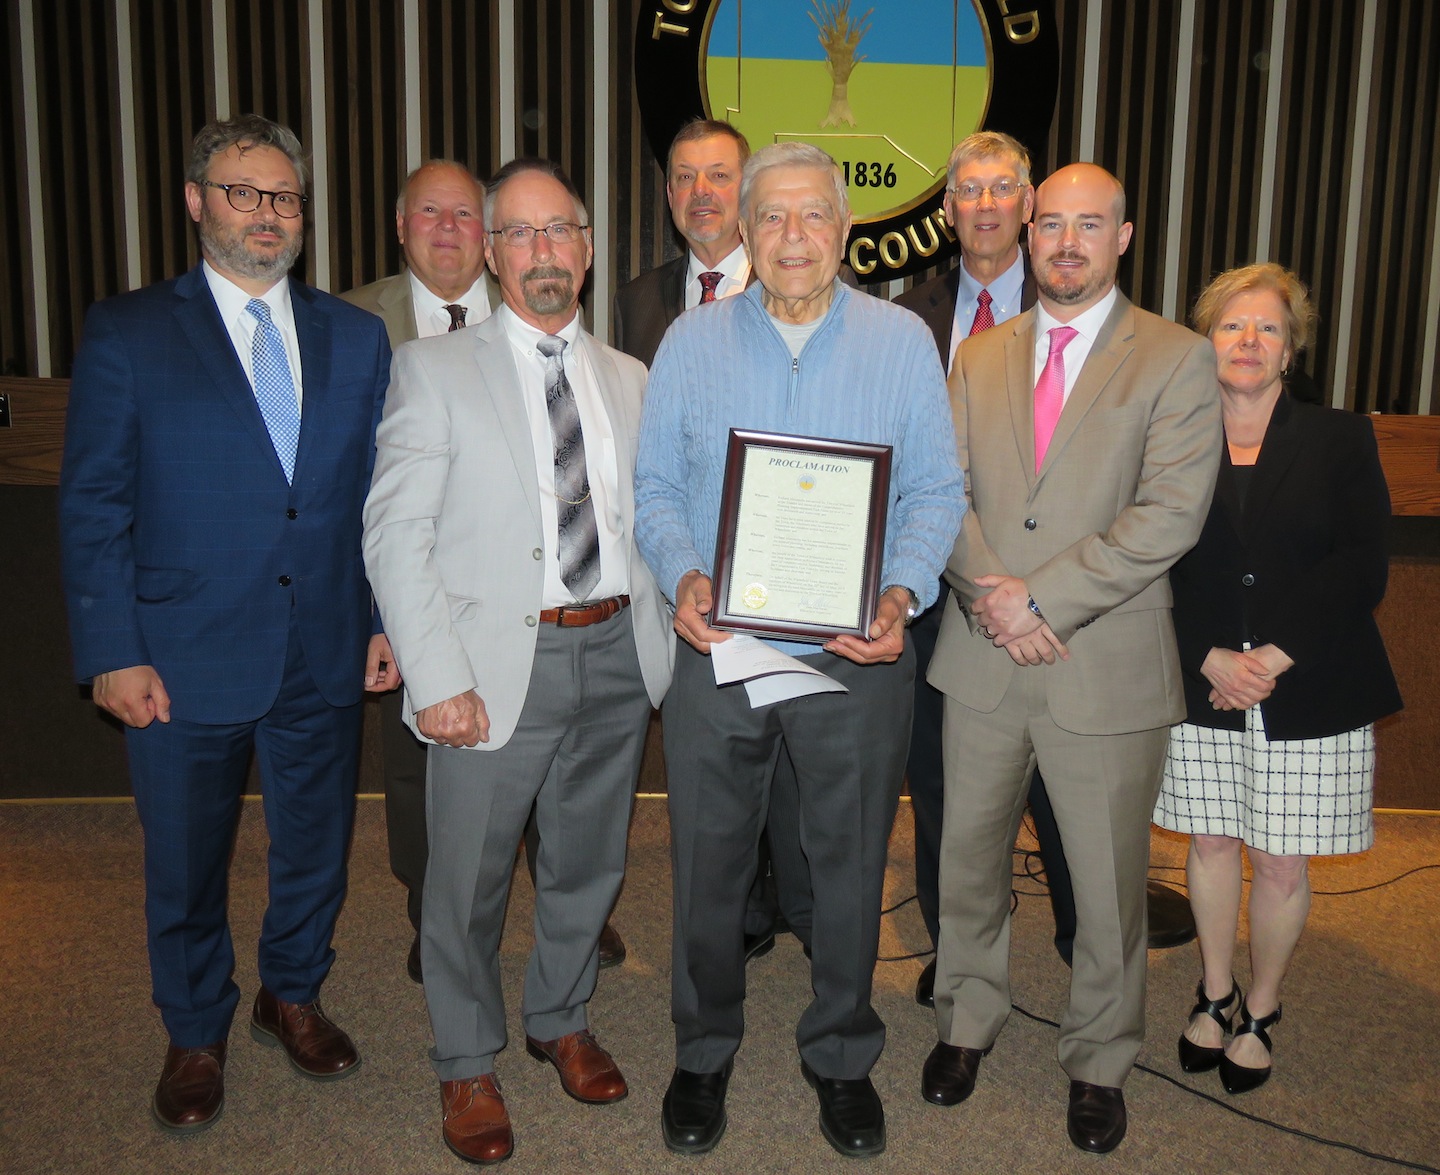 From left, Town Attorney Matt Brooks, Councilman Gil Doucet, Supervisor Don MacSwan, Councilman Randy Retzlaff, Richard Muscatello, councilmen Larry Helwig and Curt Doktor, and Town Clerk Kathy Harrington-McDonell. (Photo by David Yarger)